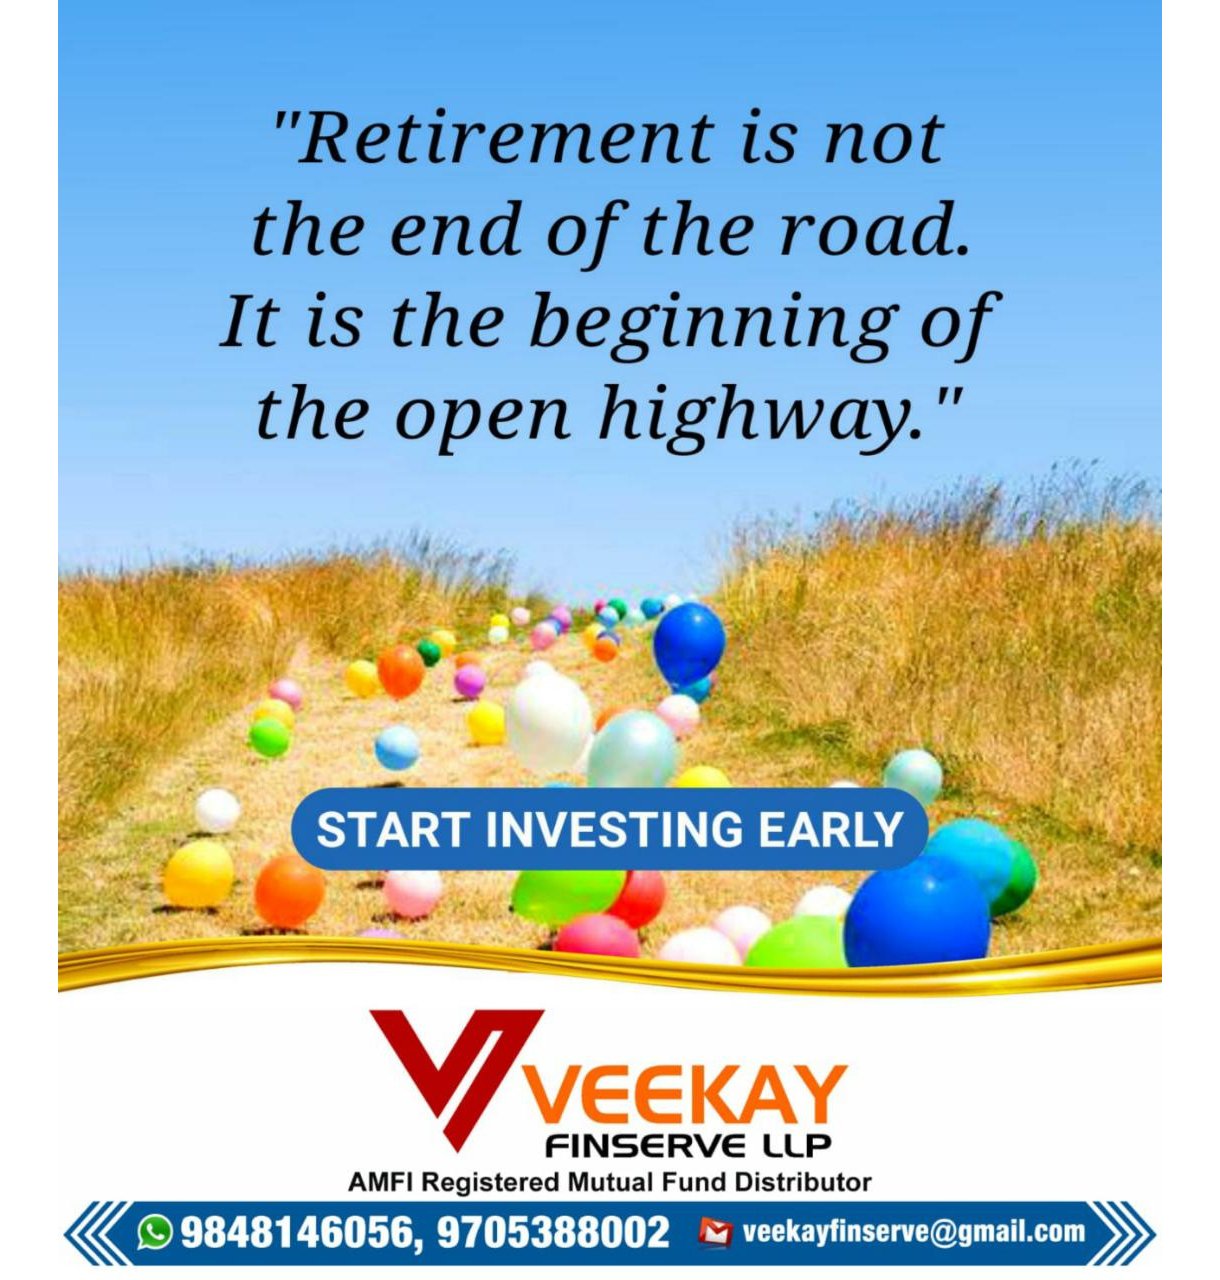 Veekay Finserve Retirement Is Not The End Of The Road Retirement Retirementplanning Financialfreedom Investment Insurance Money Financialplanning Investing Lifeinsurance T Co Qalgd1pif1 Twitter